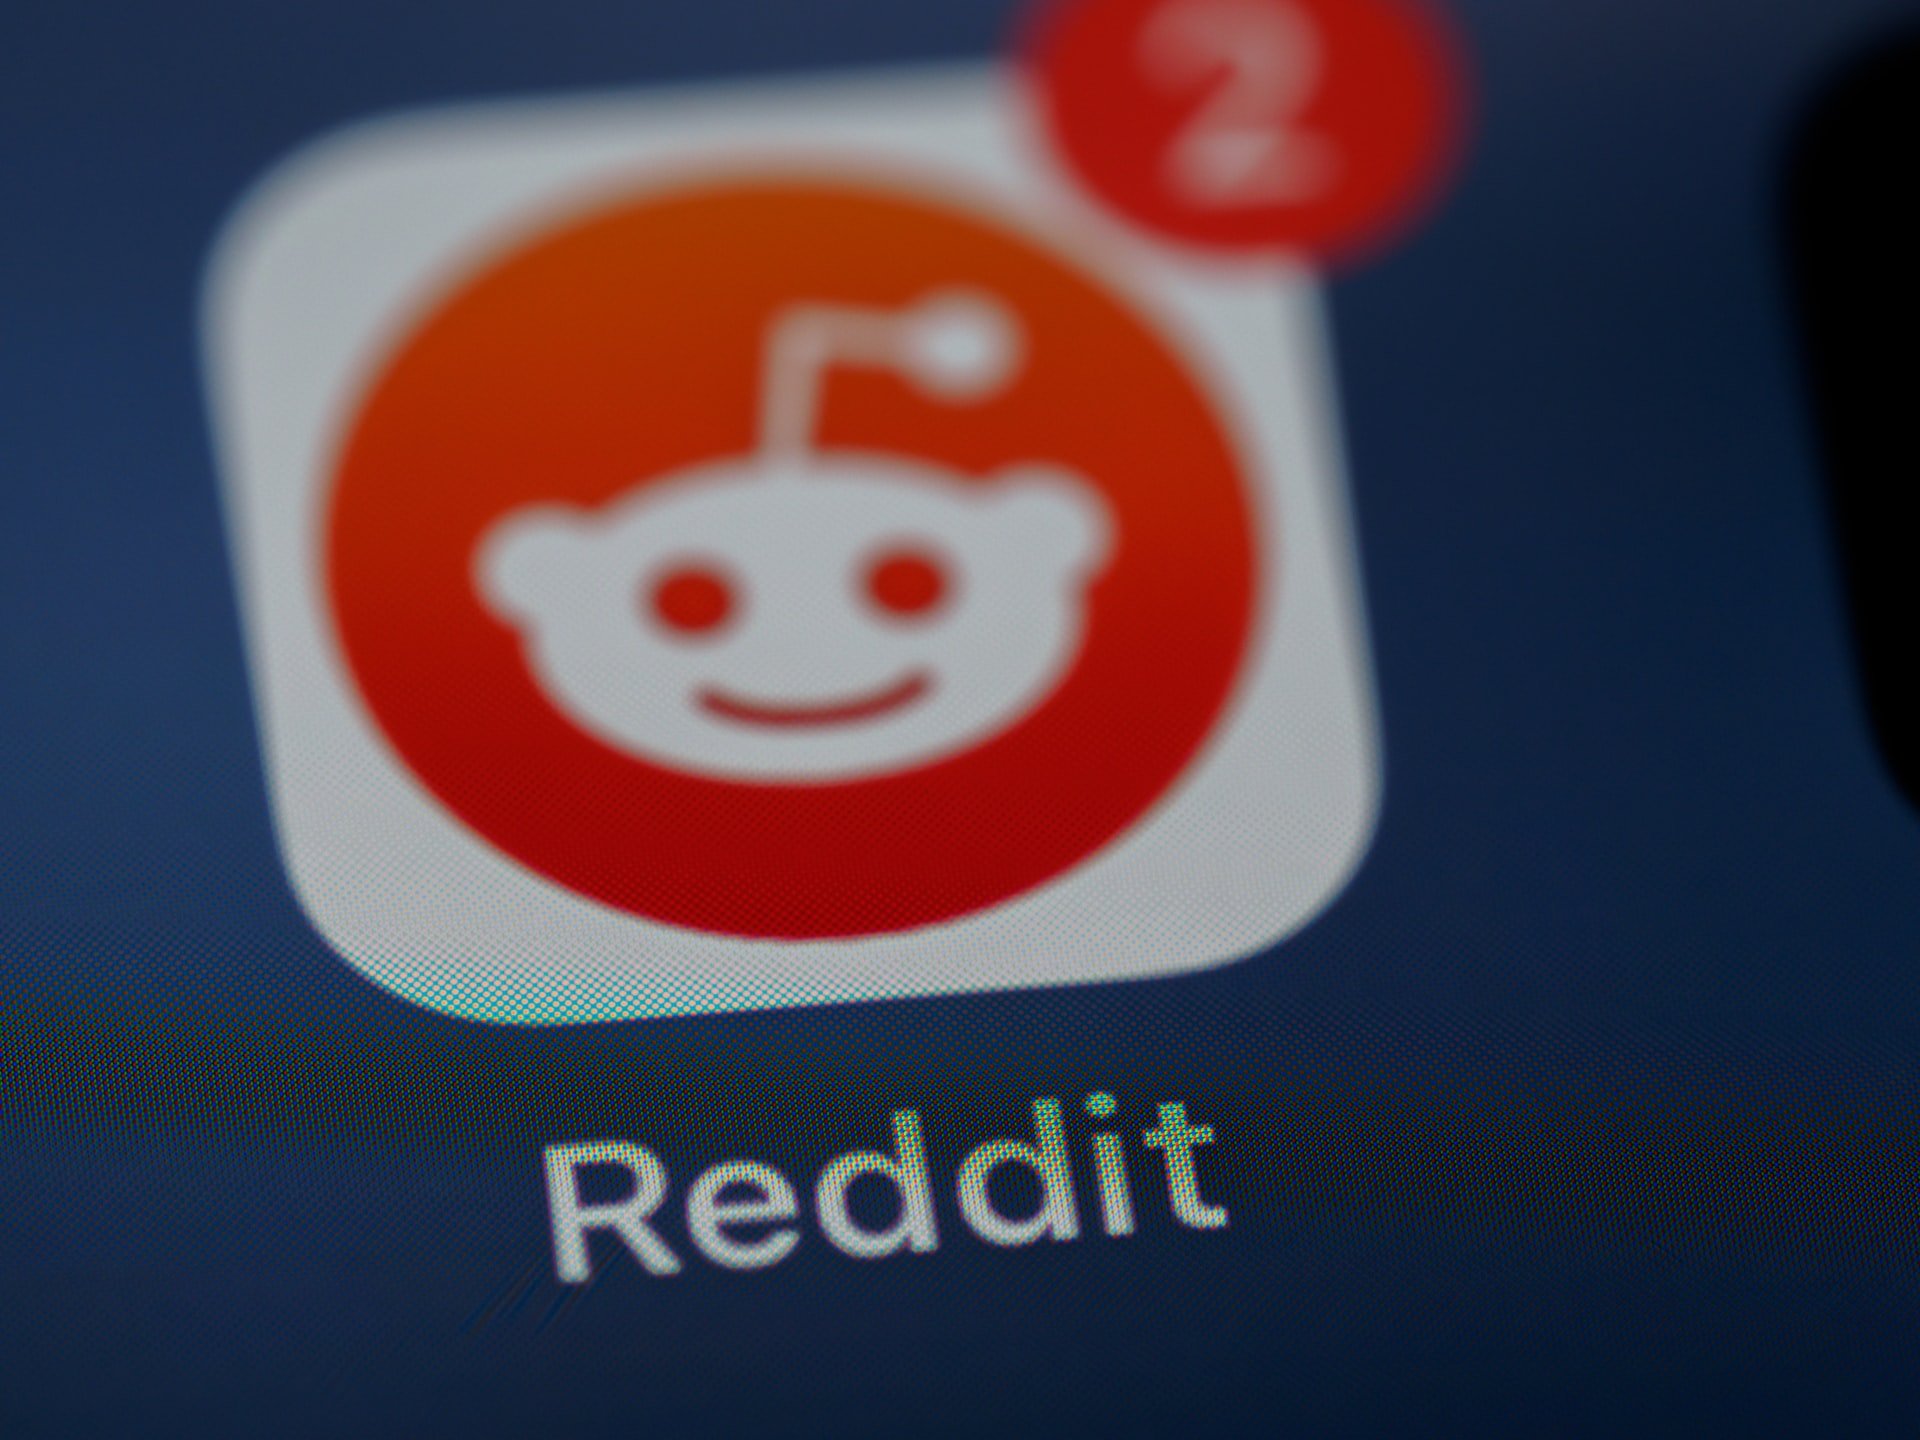 Most users supported OP on Reddit | Source: Unsplash